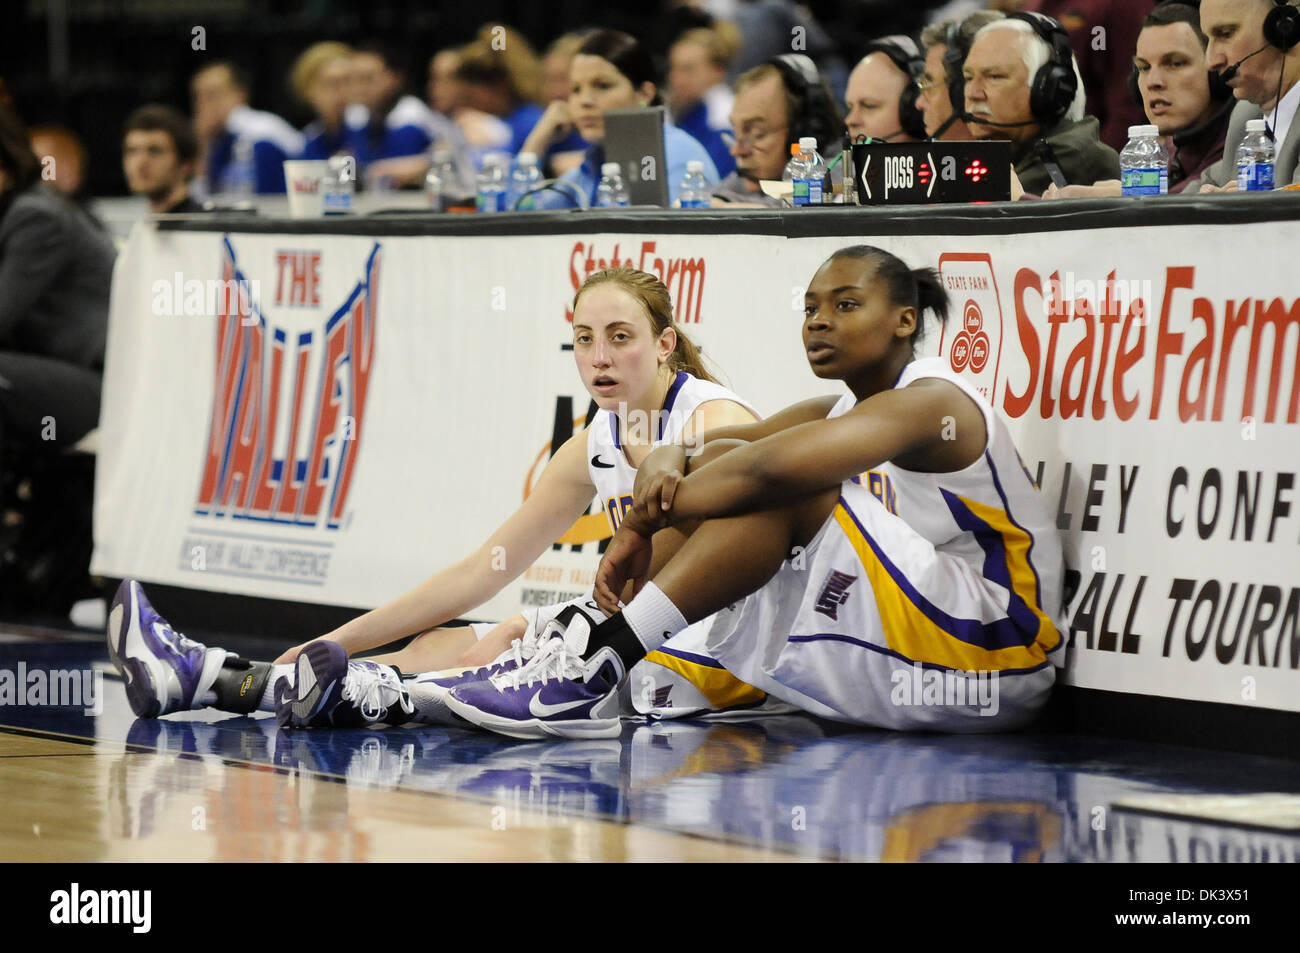 Mar. 12, 2011 - St. Charles, Missouri, U.S - Two Northern Iowa players wait for a stoppage in play so the can be substituted into the game early in the second half of the sectional MVC tournament game vs Wichita State.  Iowa defeated Wichita 61-44 to move into the championship game. (Credit Image: © Richard Ulreich/Southcreek Global/ZUMApress.com) Stock Photo